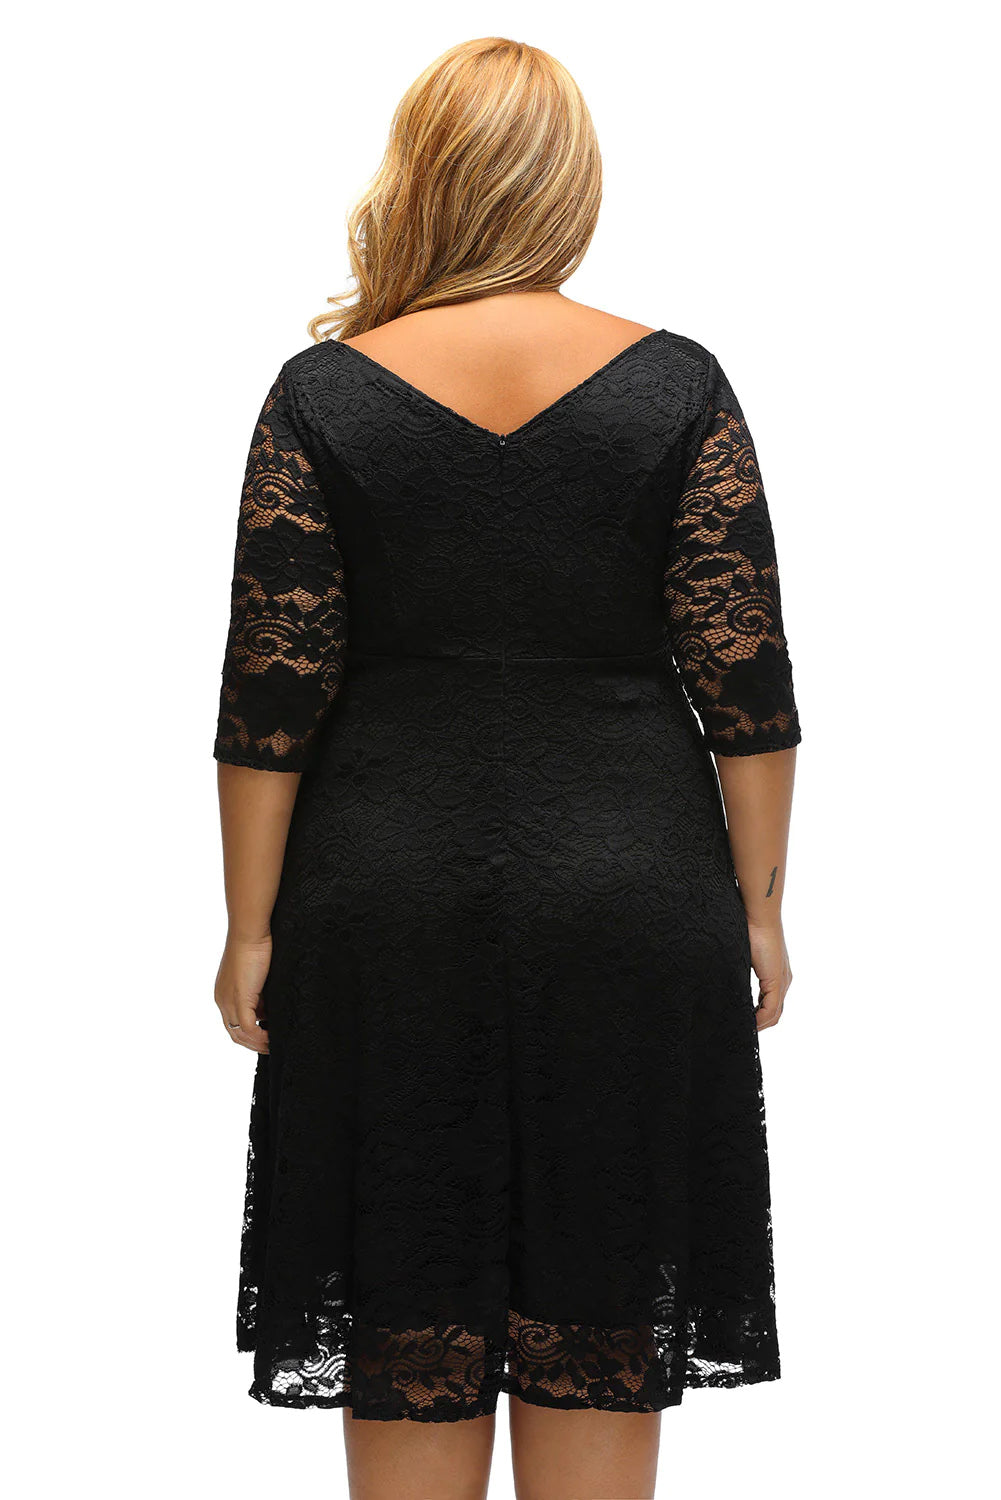 Rina Black Floral Lace Sleeved Fit and Flare Curvy Dress - The Bohemian Closet